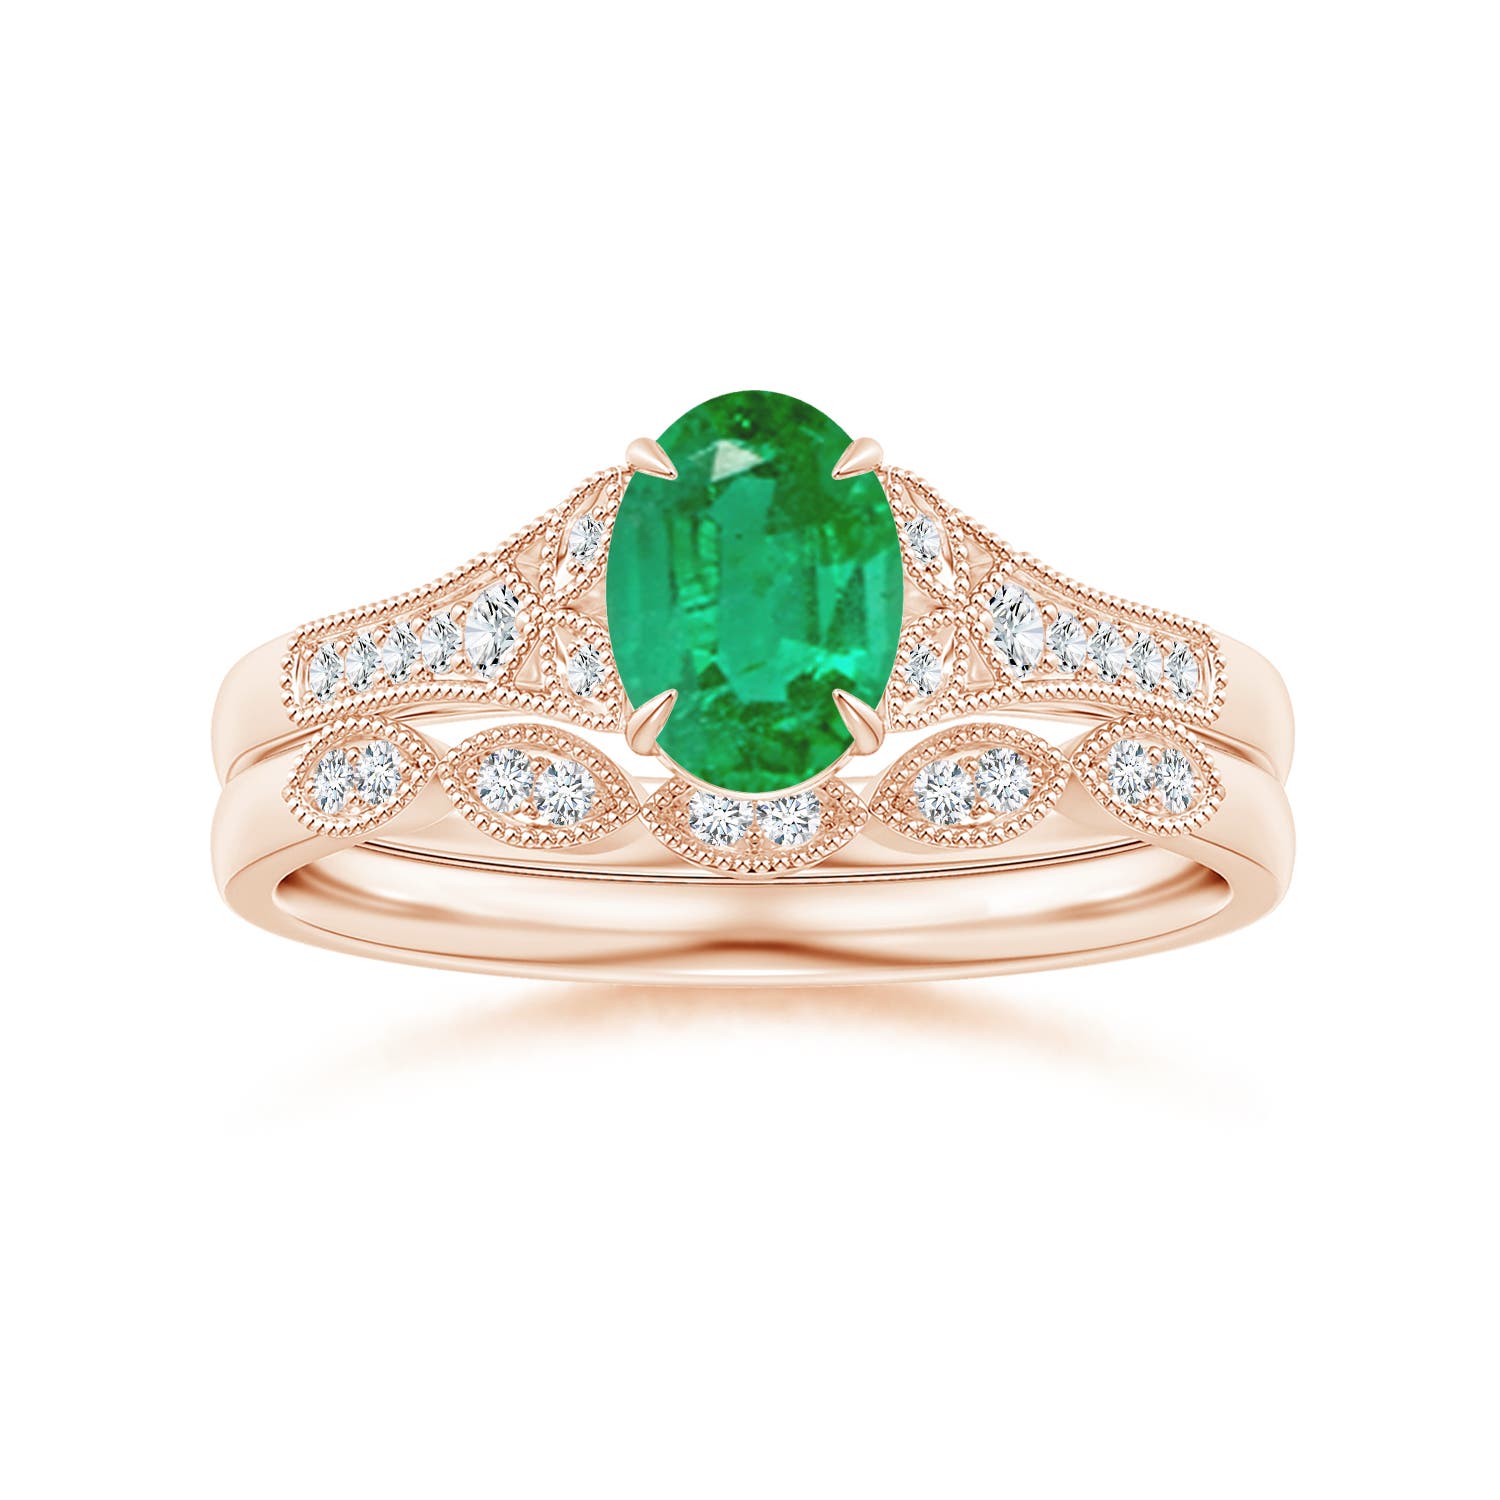 AA - Emerald / 0.77 CT / 14 KT Rose Gold